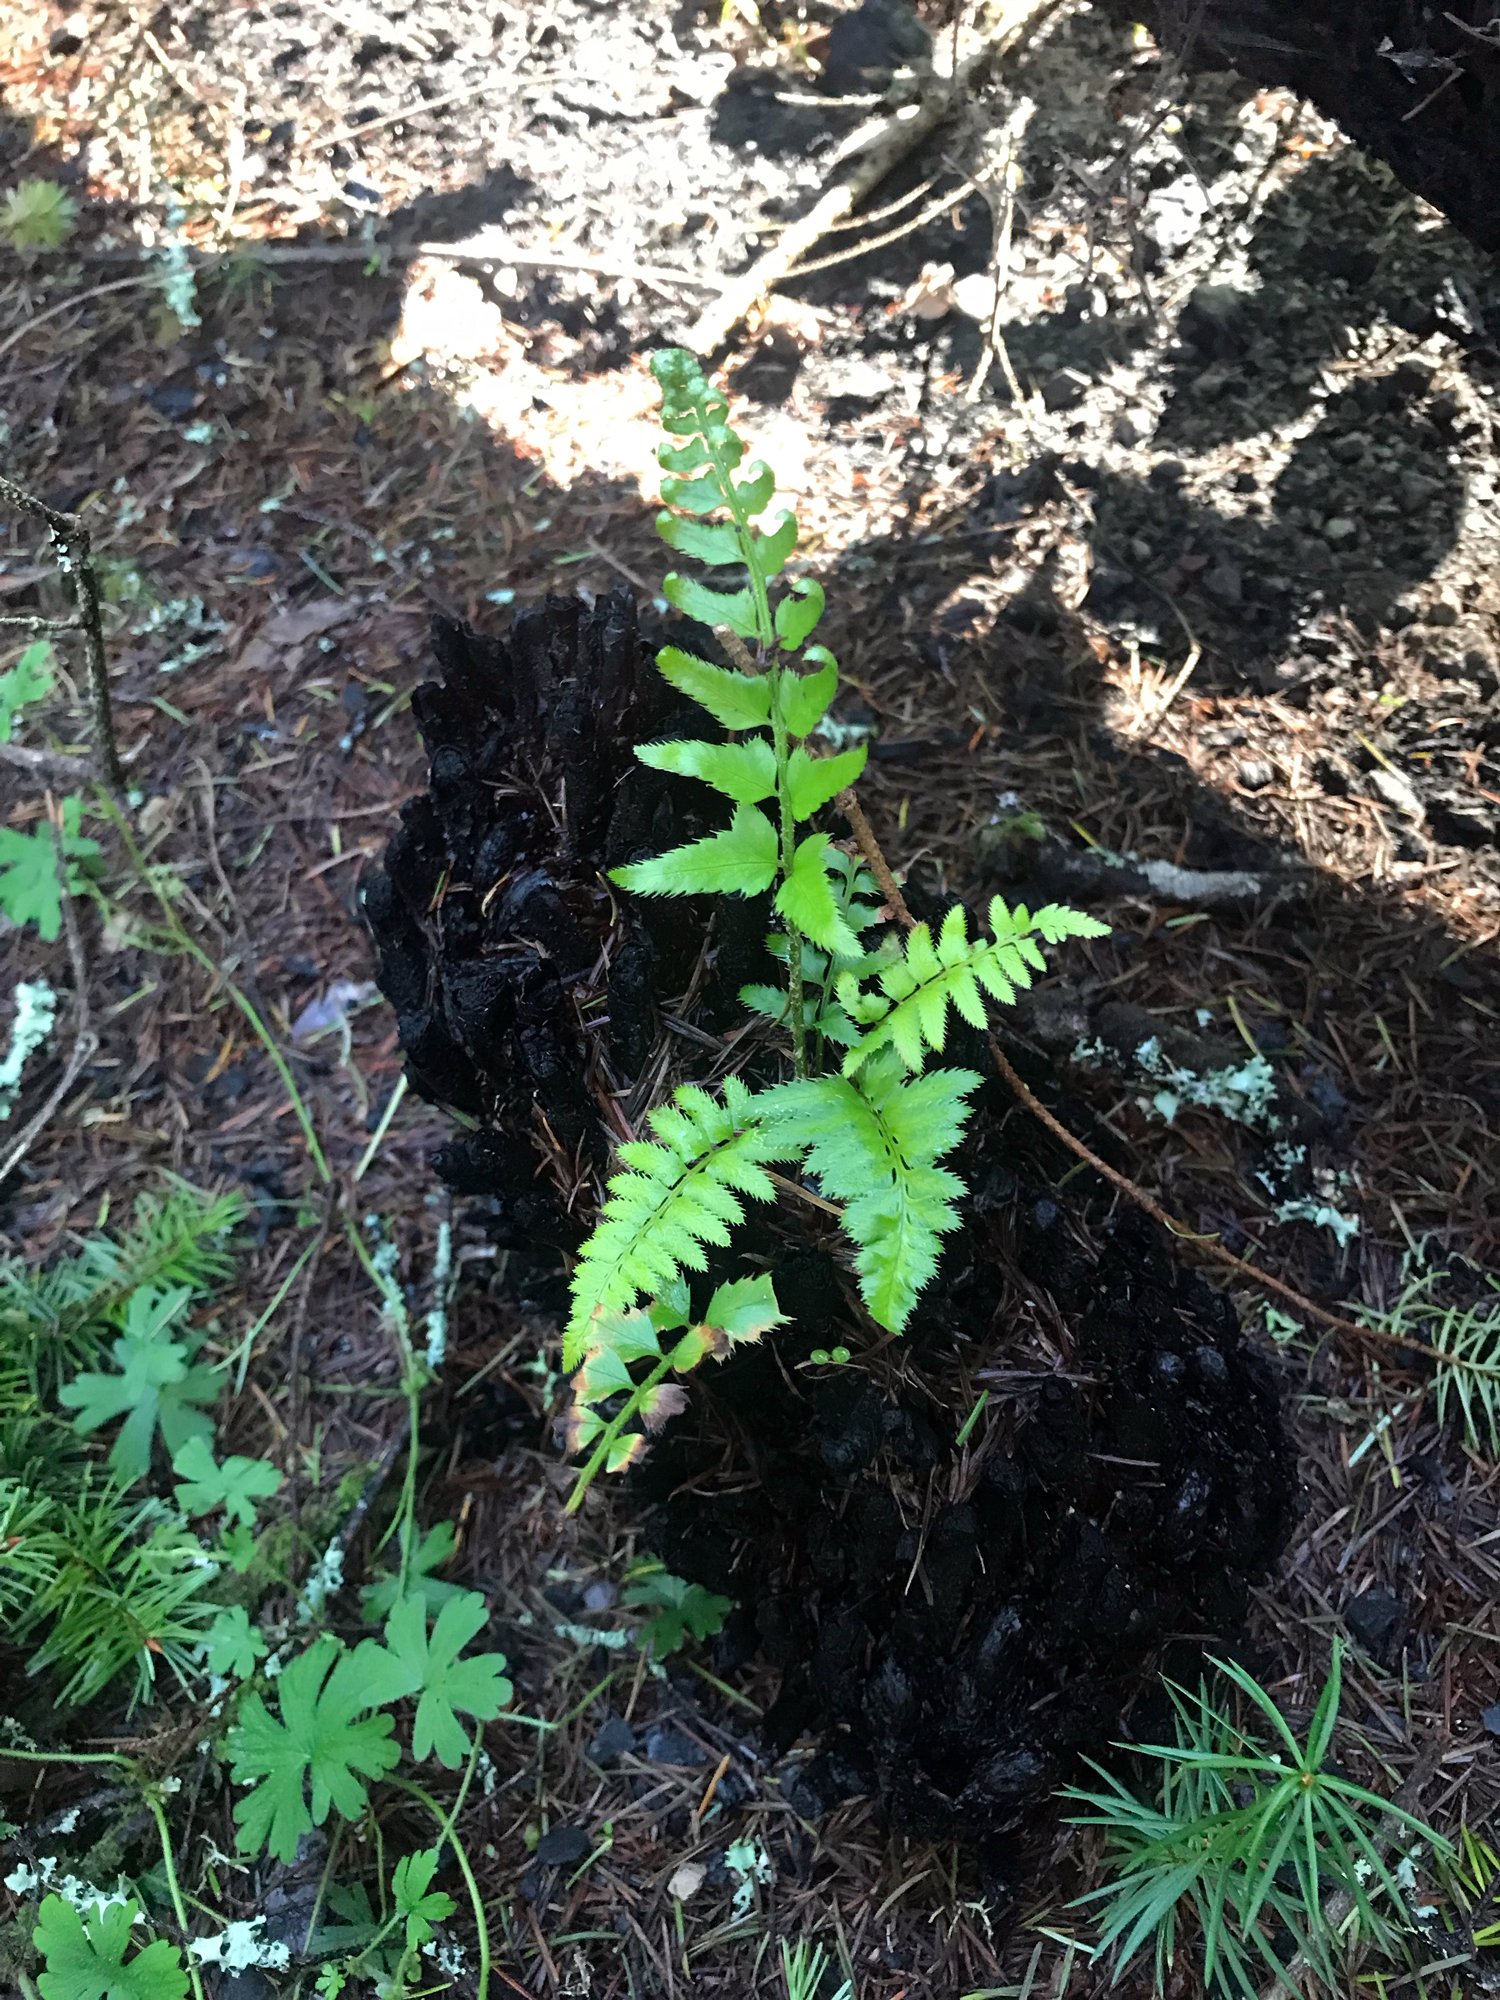 swordfern sprouting from charred remains